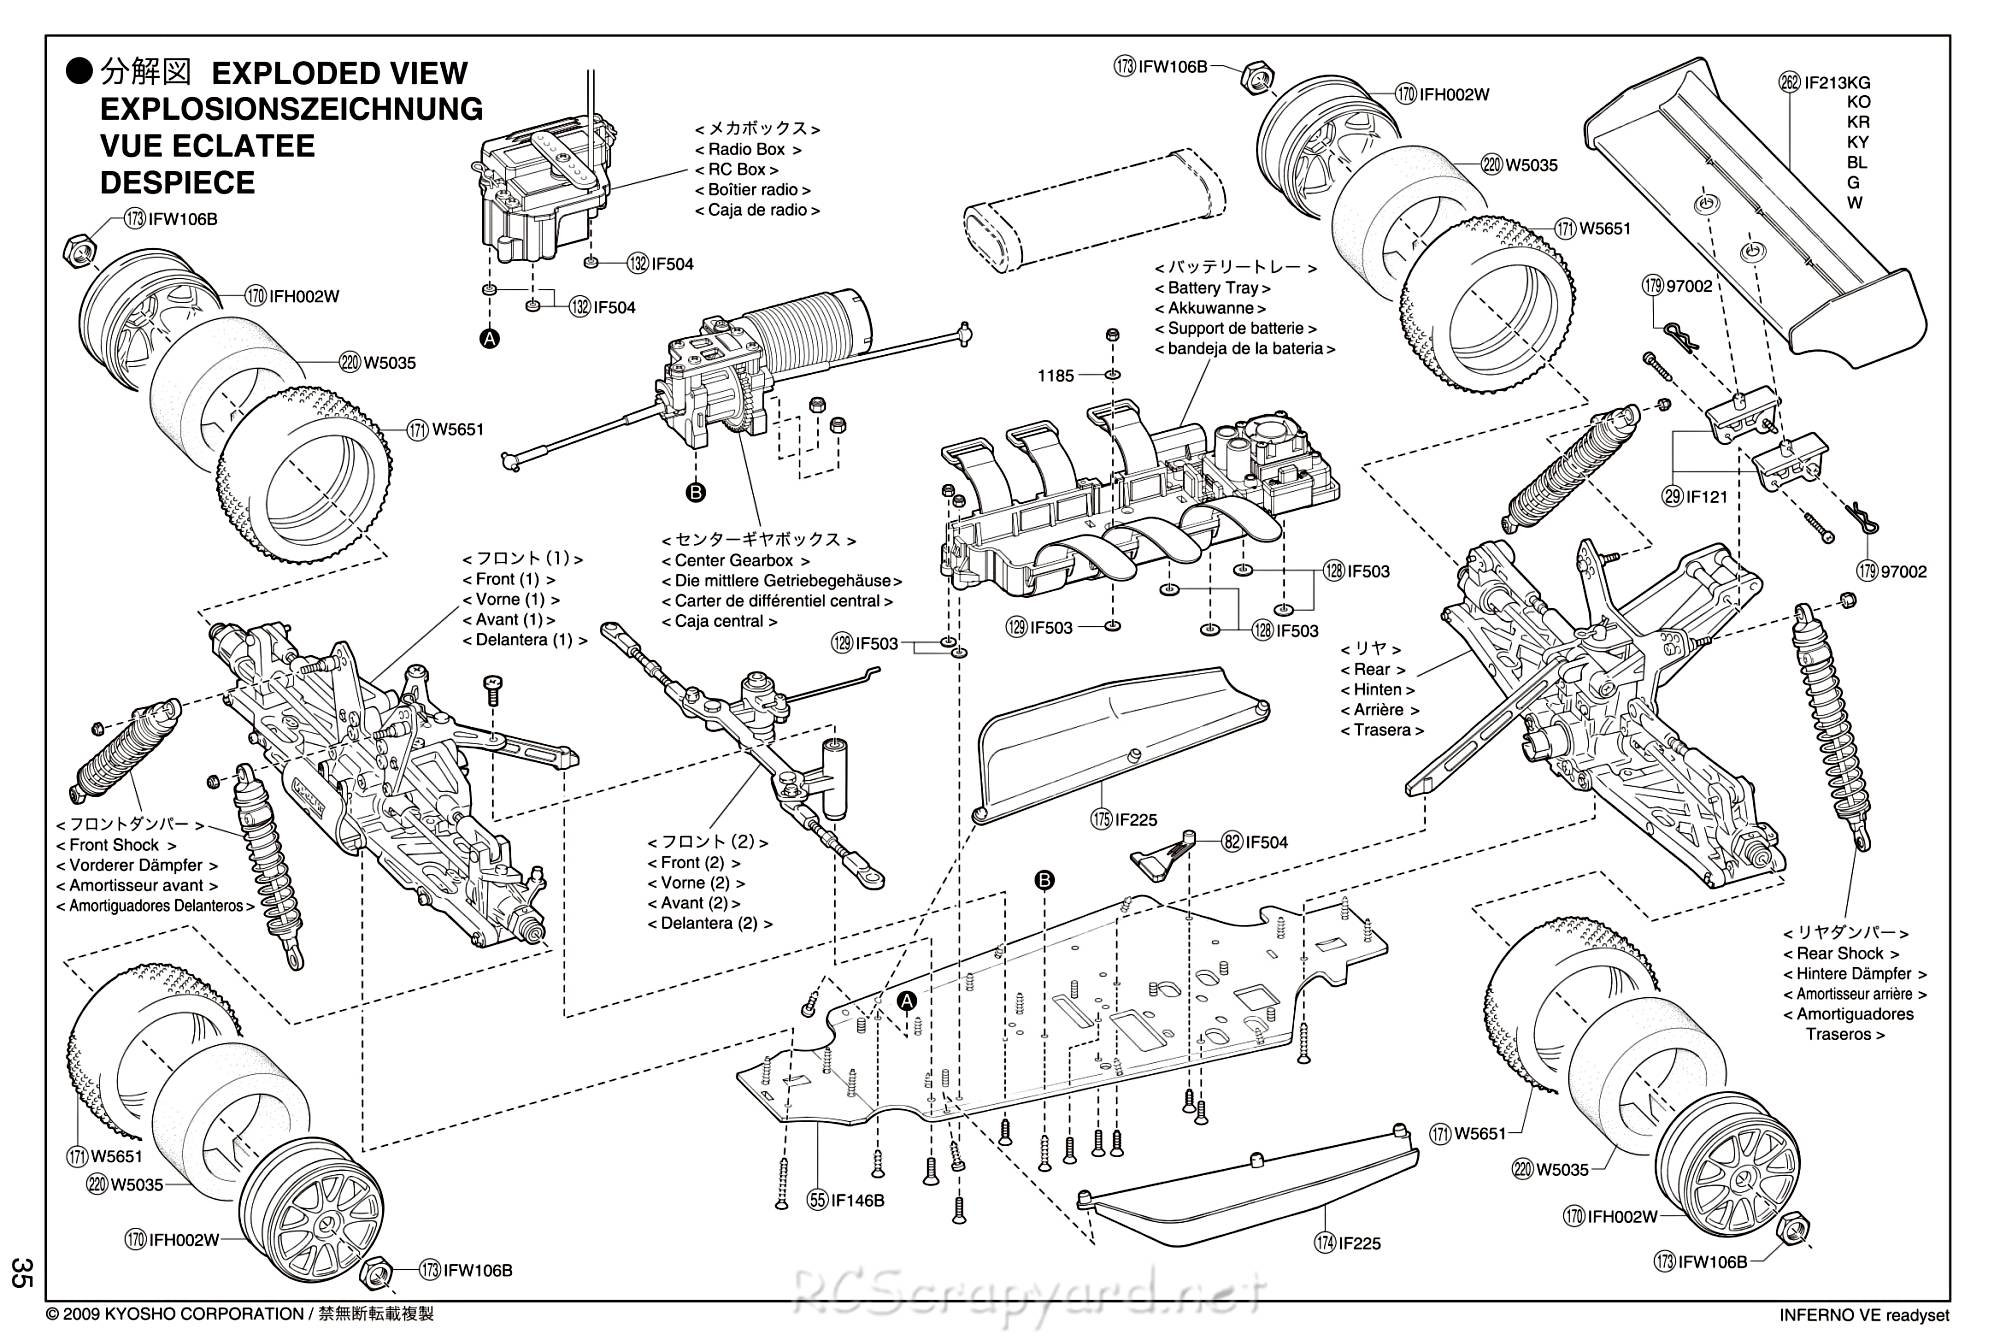 Kyosho Inferno VE Chassis - Exploded View